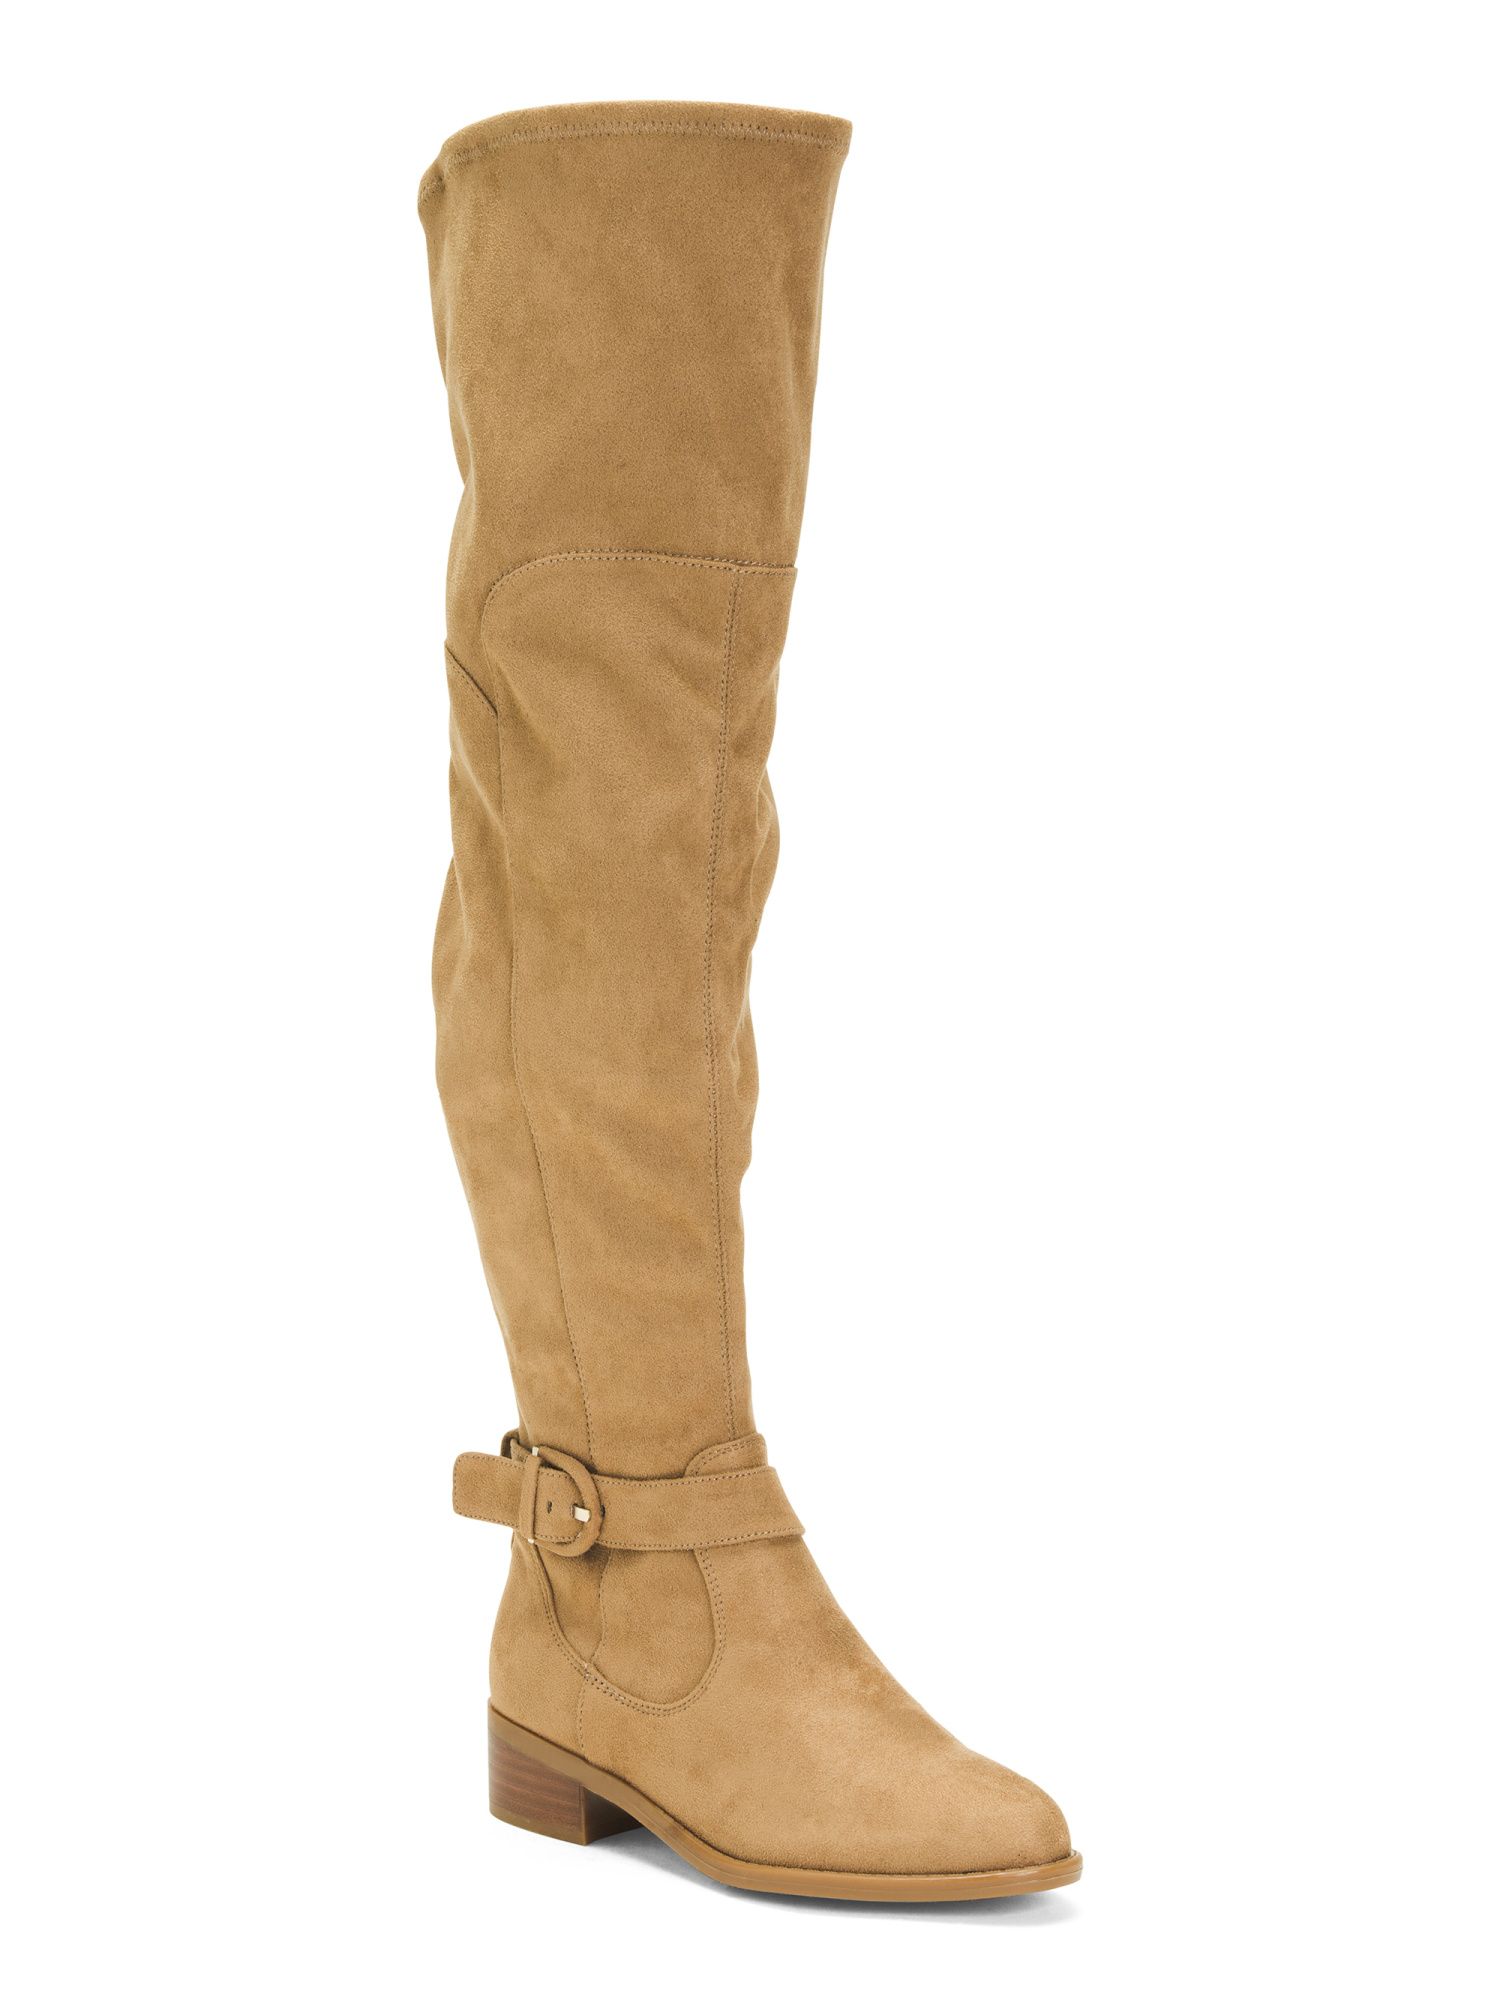 Over The Knee Boots | TJ Maxx